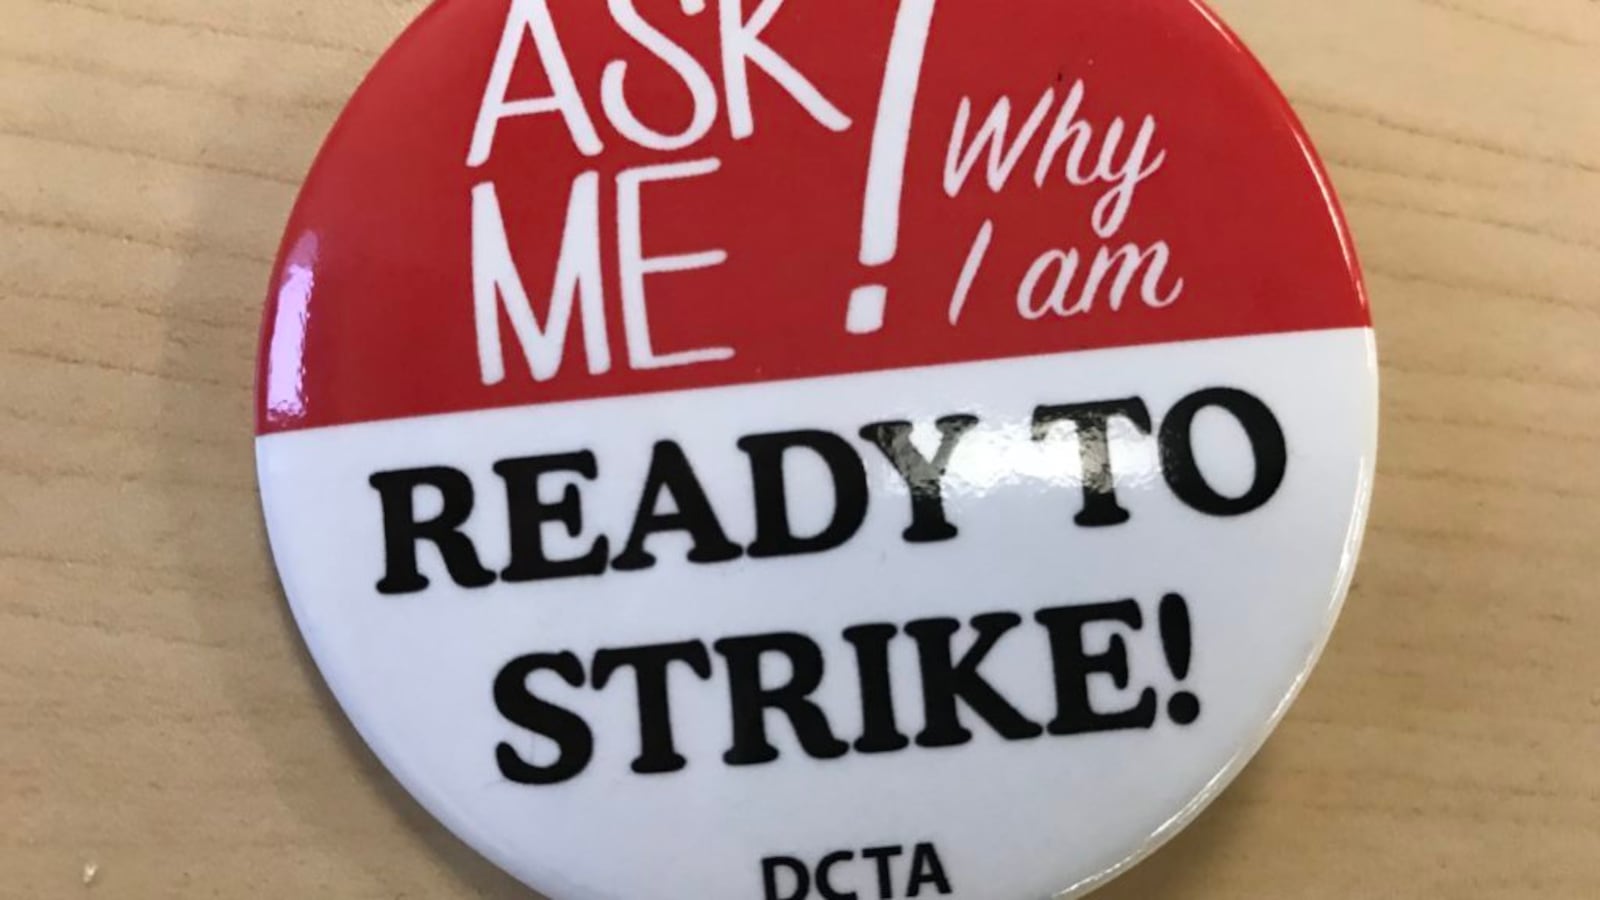 Some Denver teachers are wearing these buttons, provided by the union, at the teacher pay negotiations.